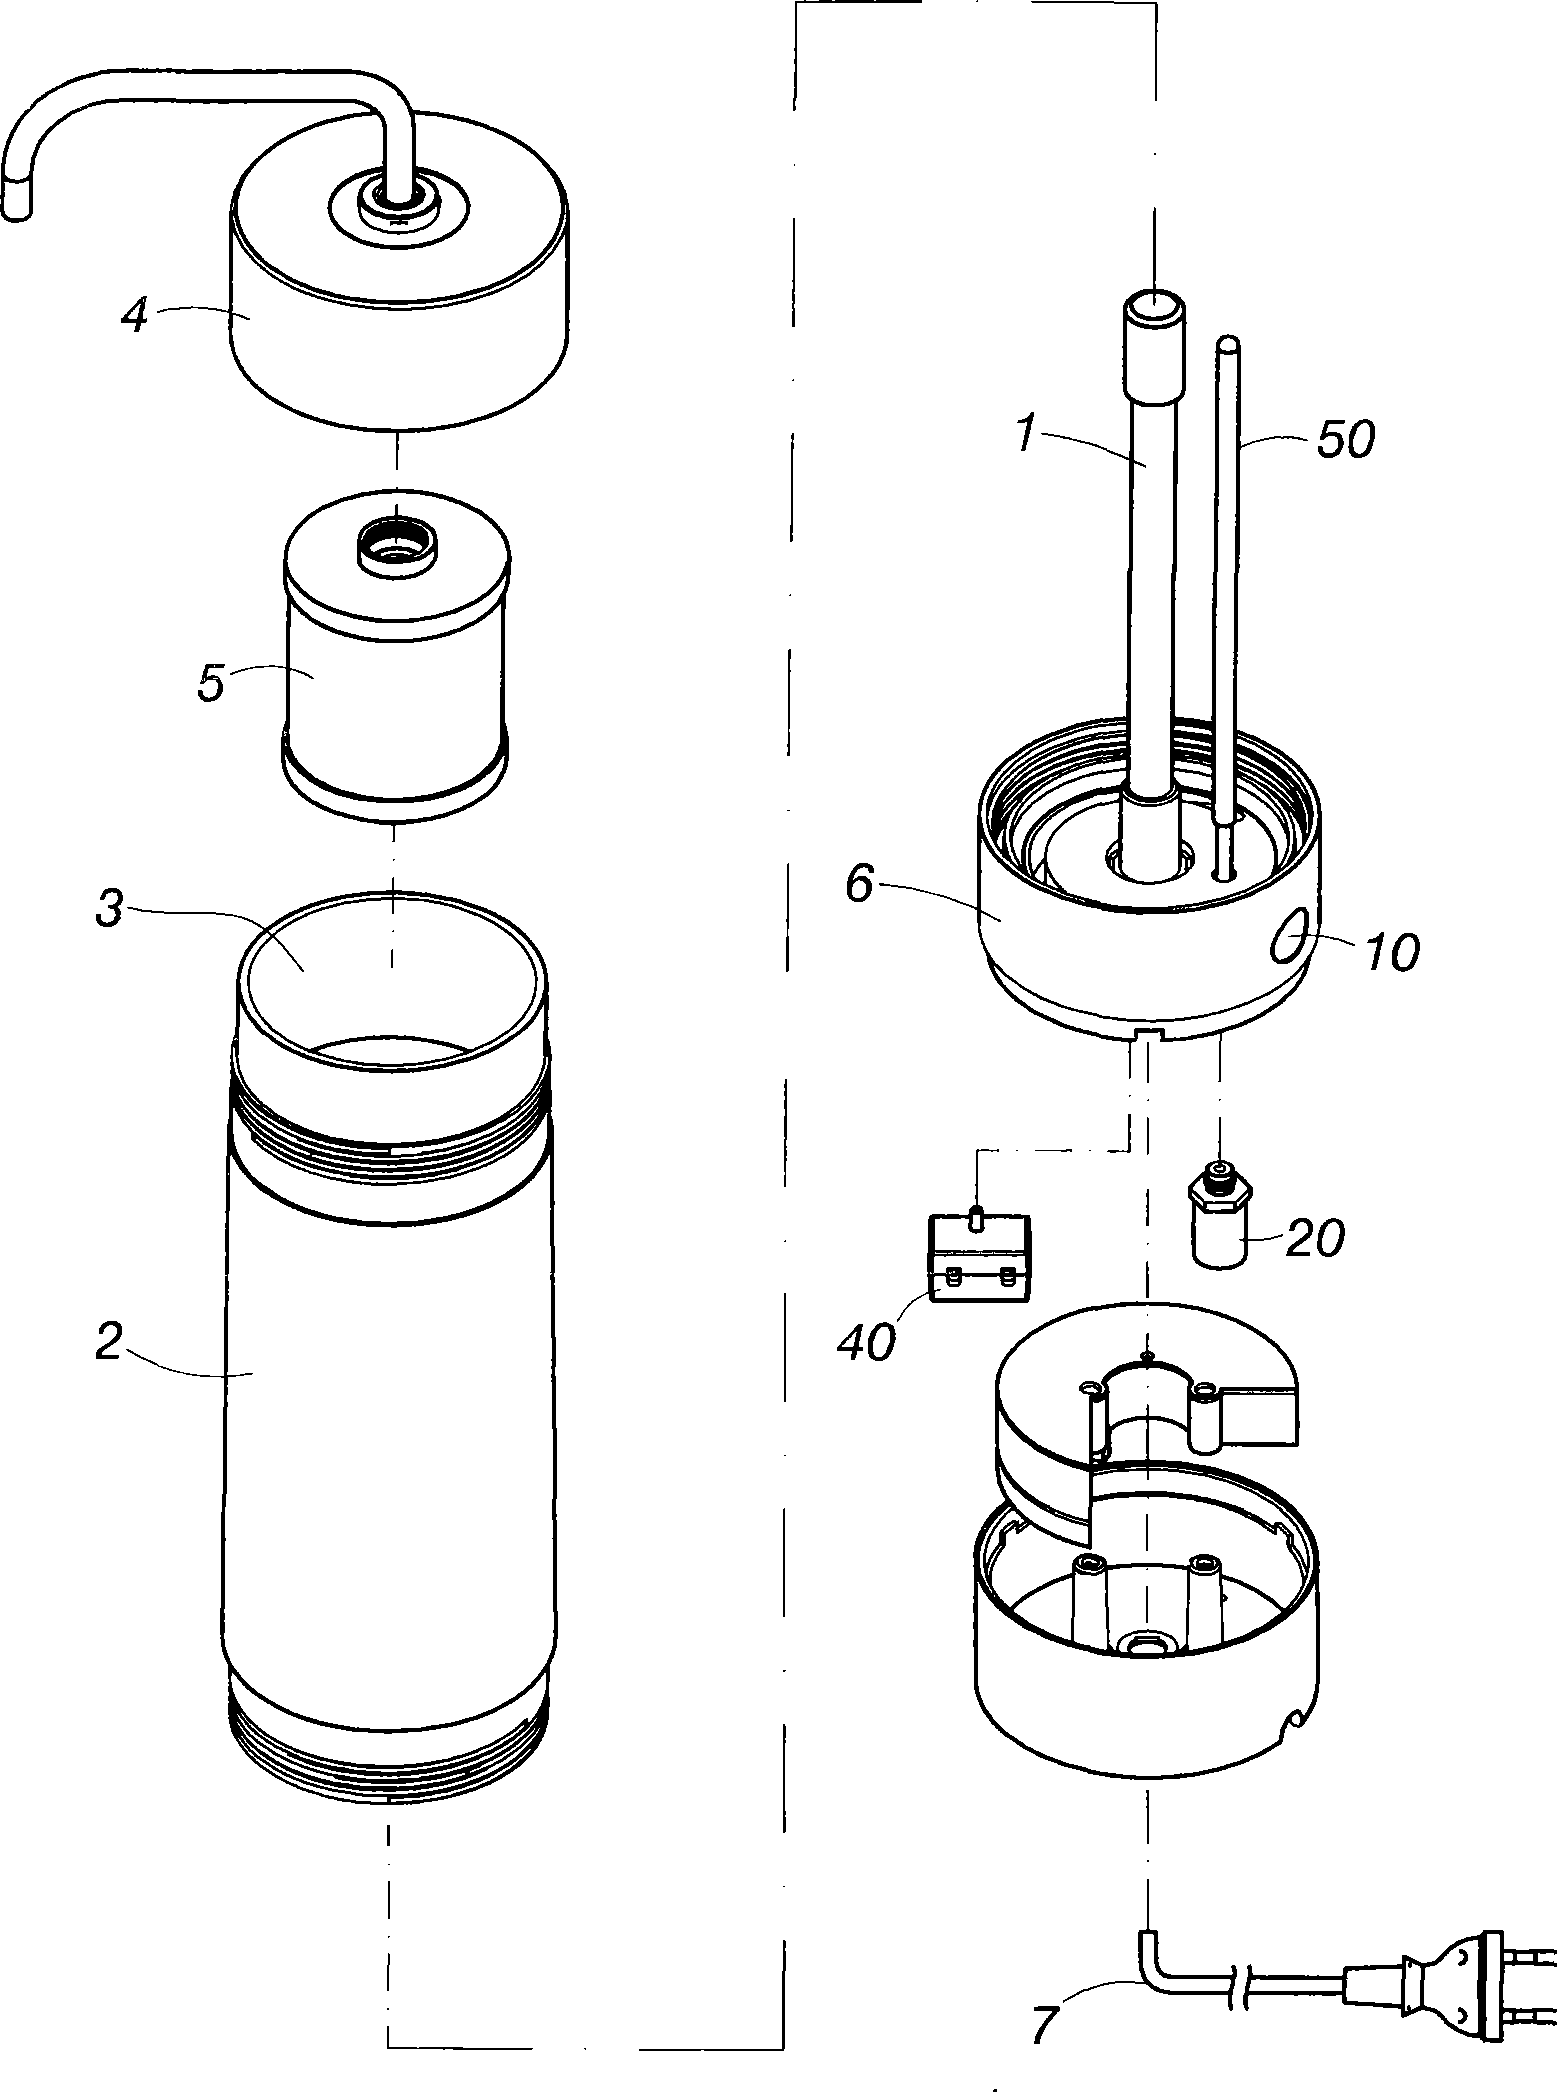 UV water-filter control device and water pressure switch group